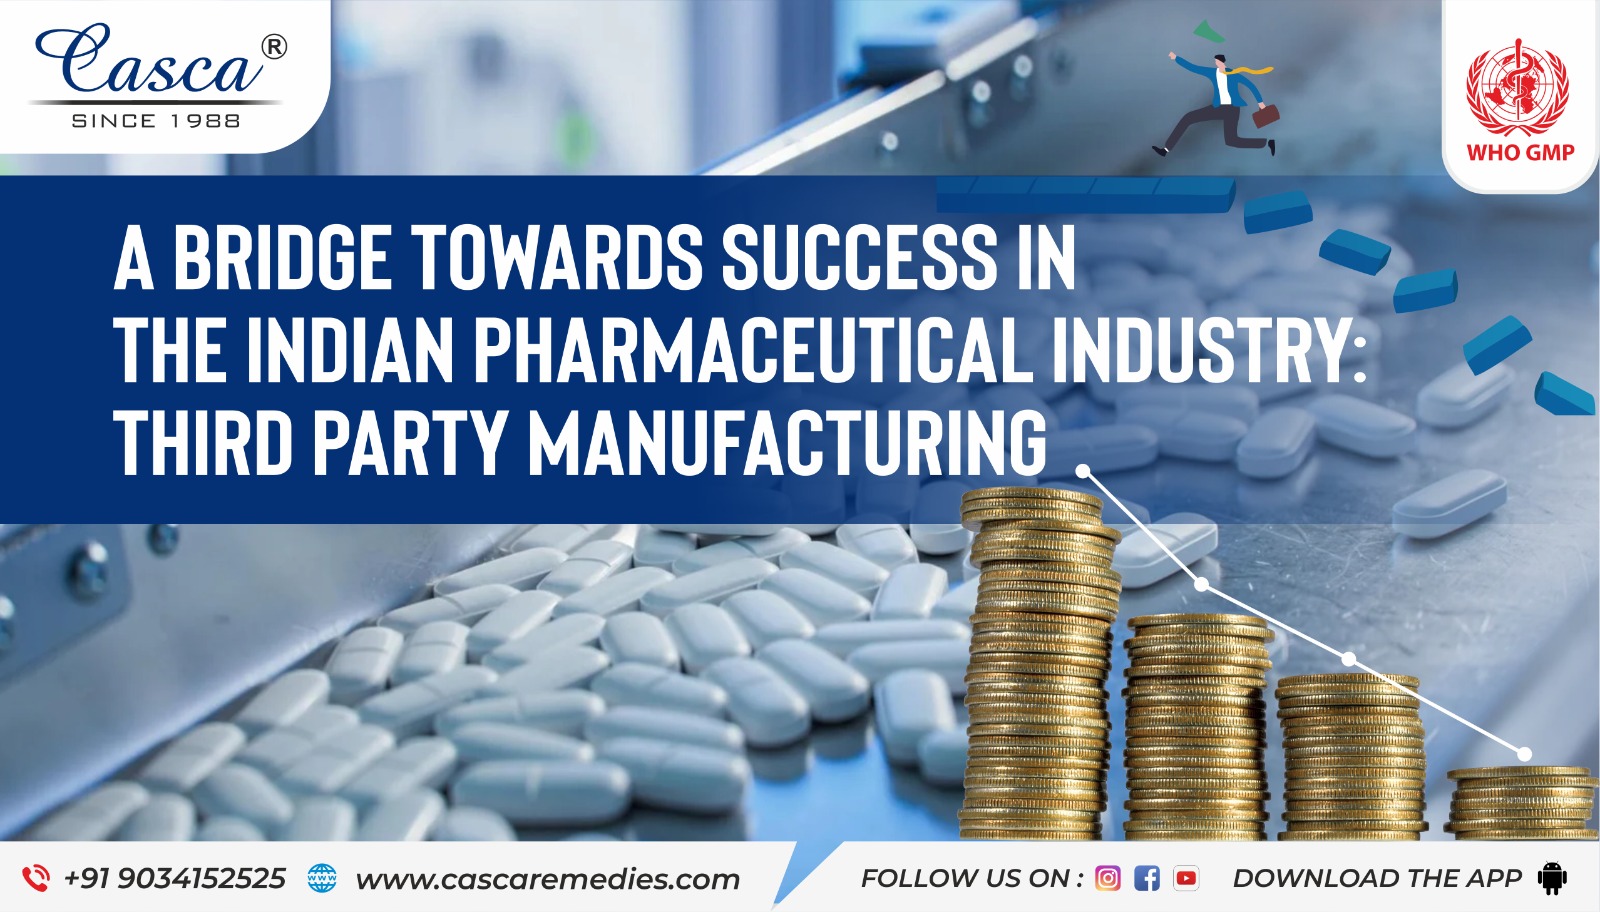 Third party manufacturing pharma